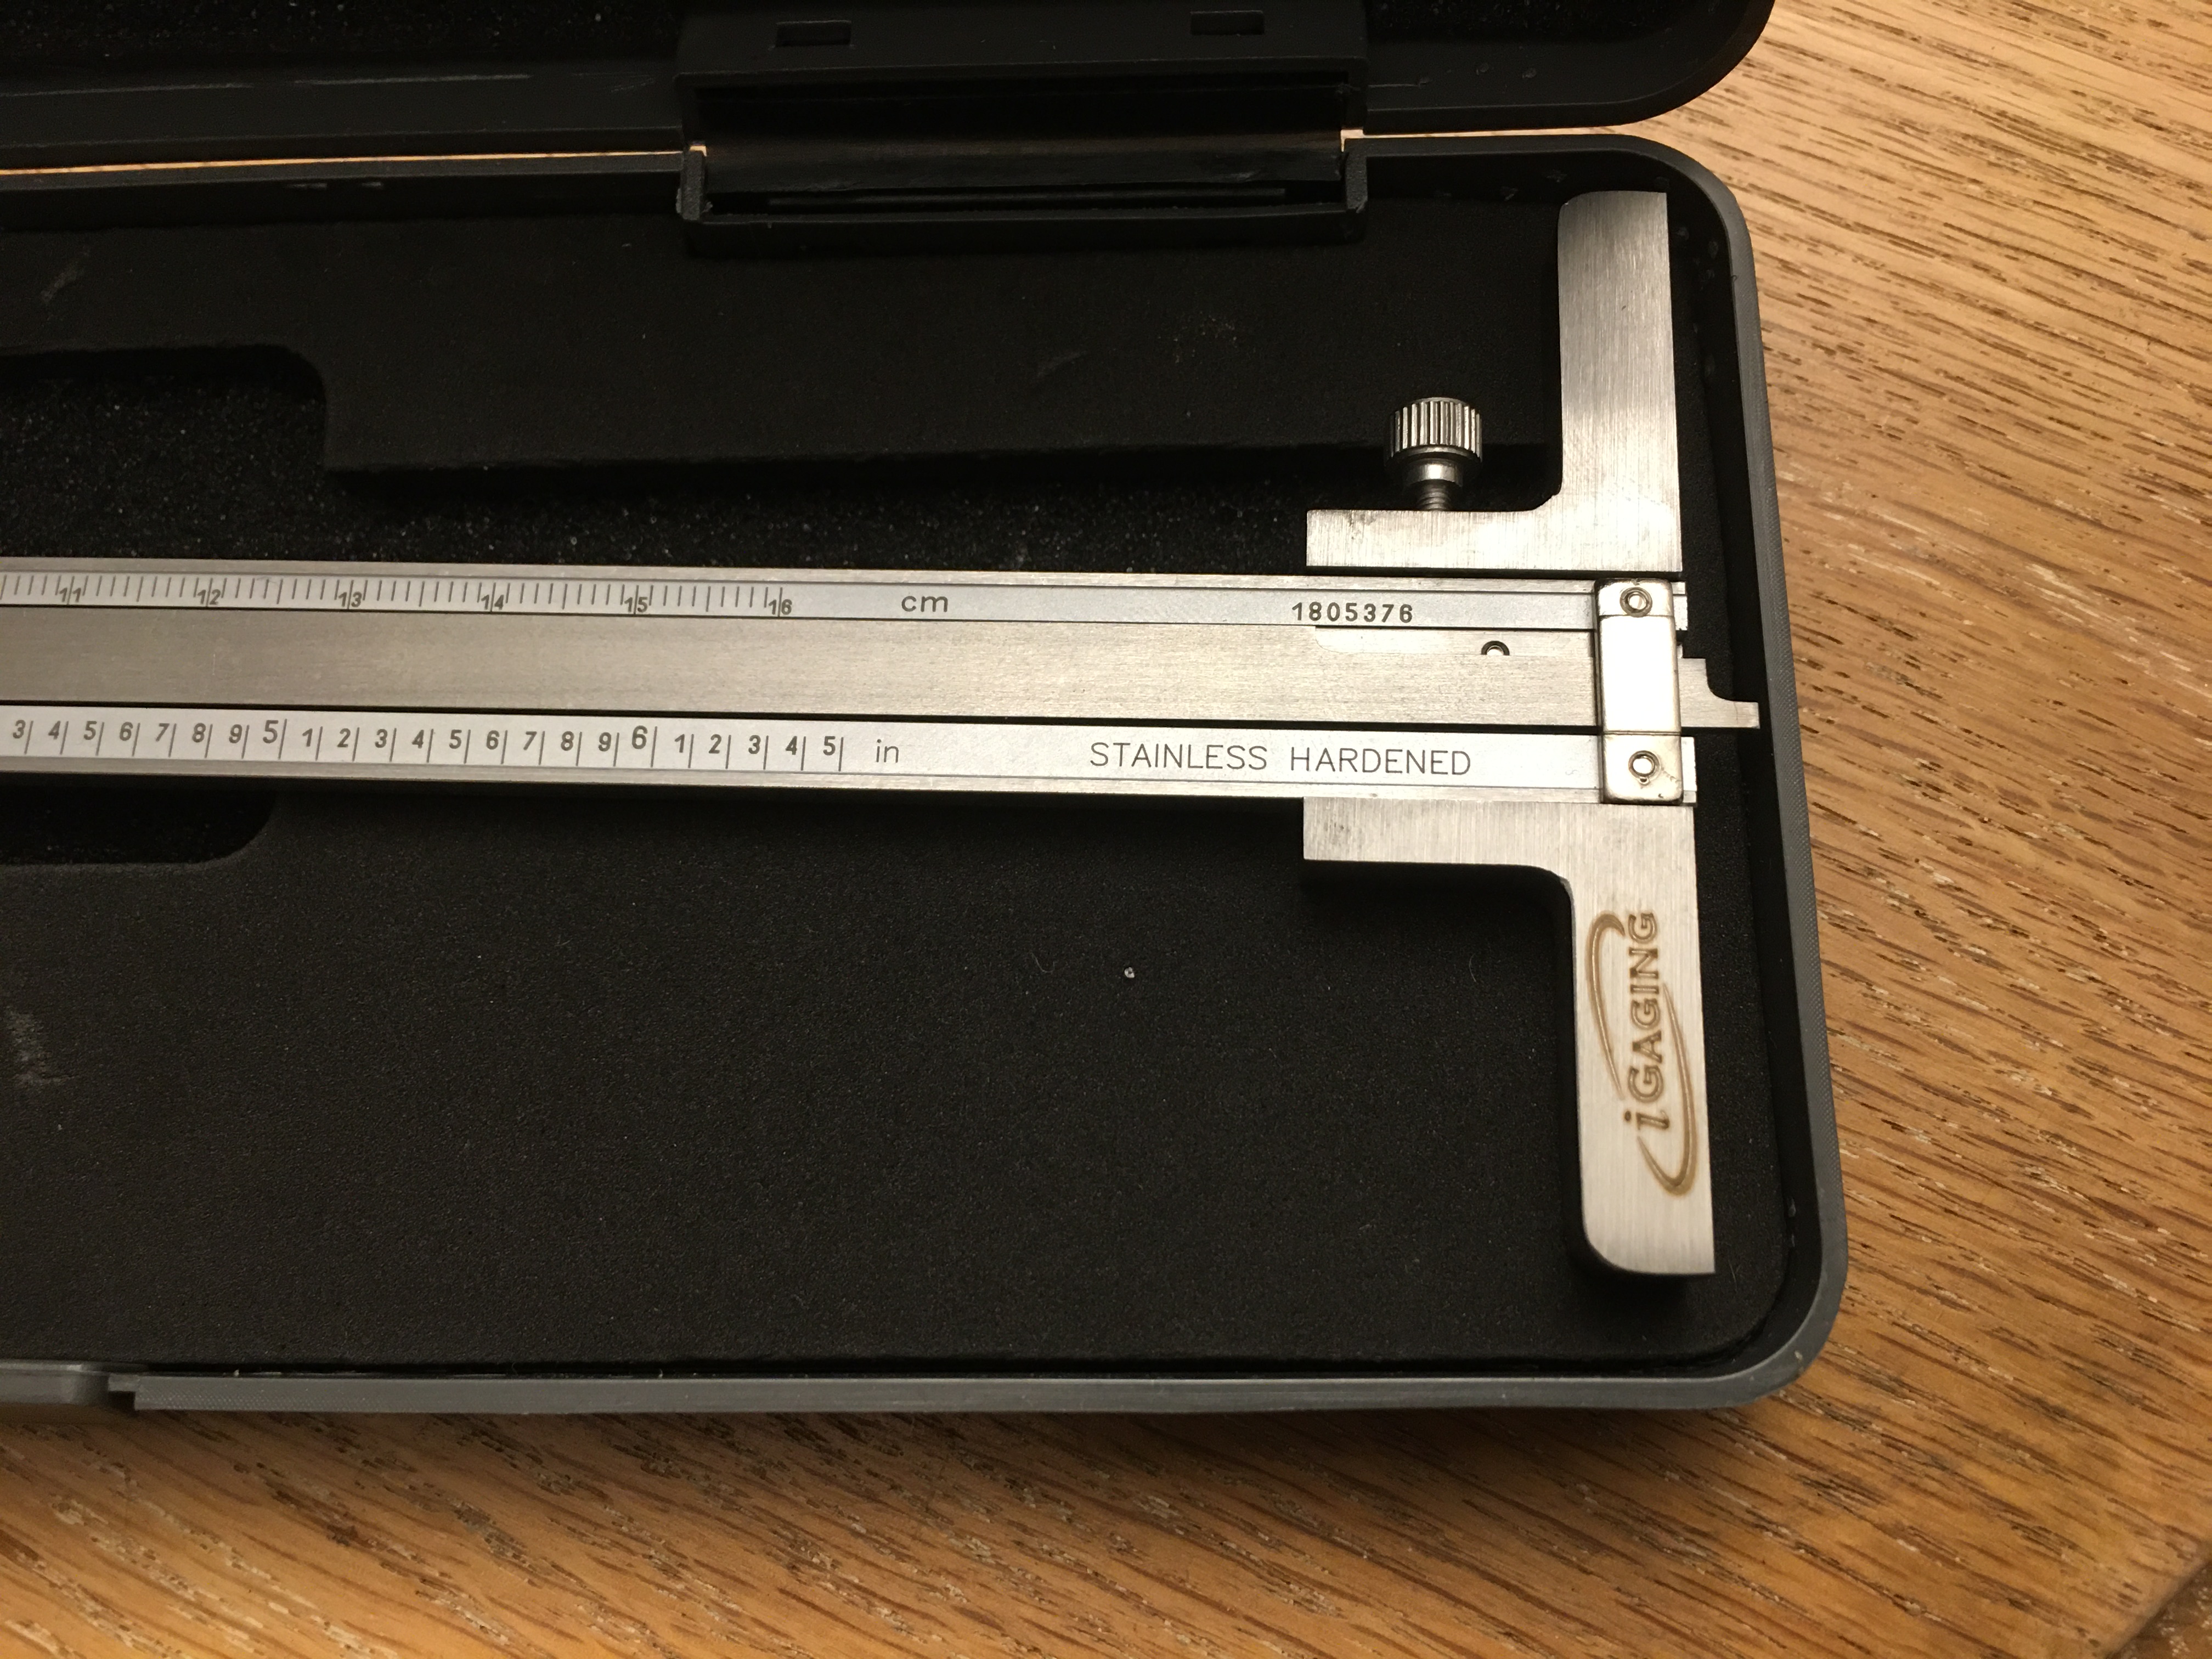  iGaging Dial Caliper 6" 150mm Dual Scale Metric in mm with Depth Base T-Bar